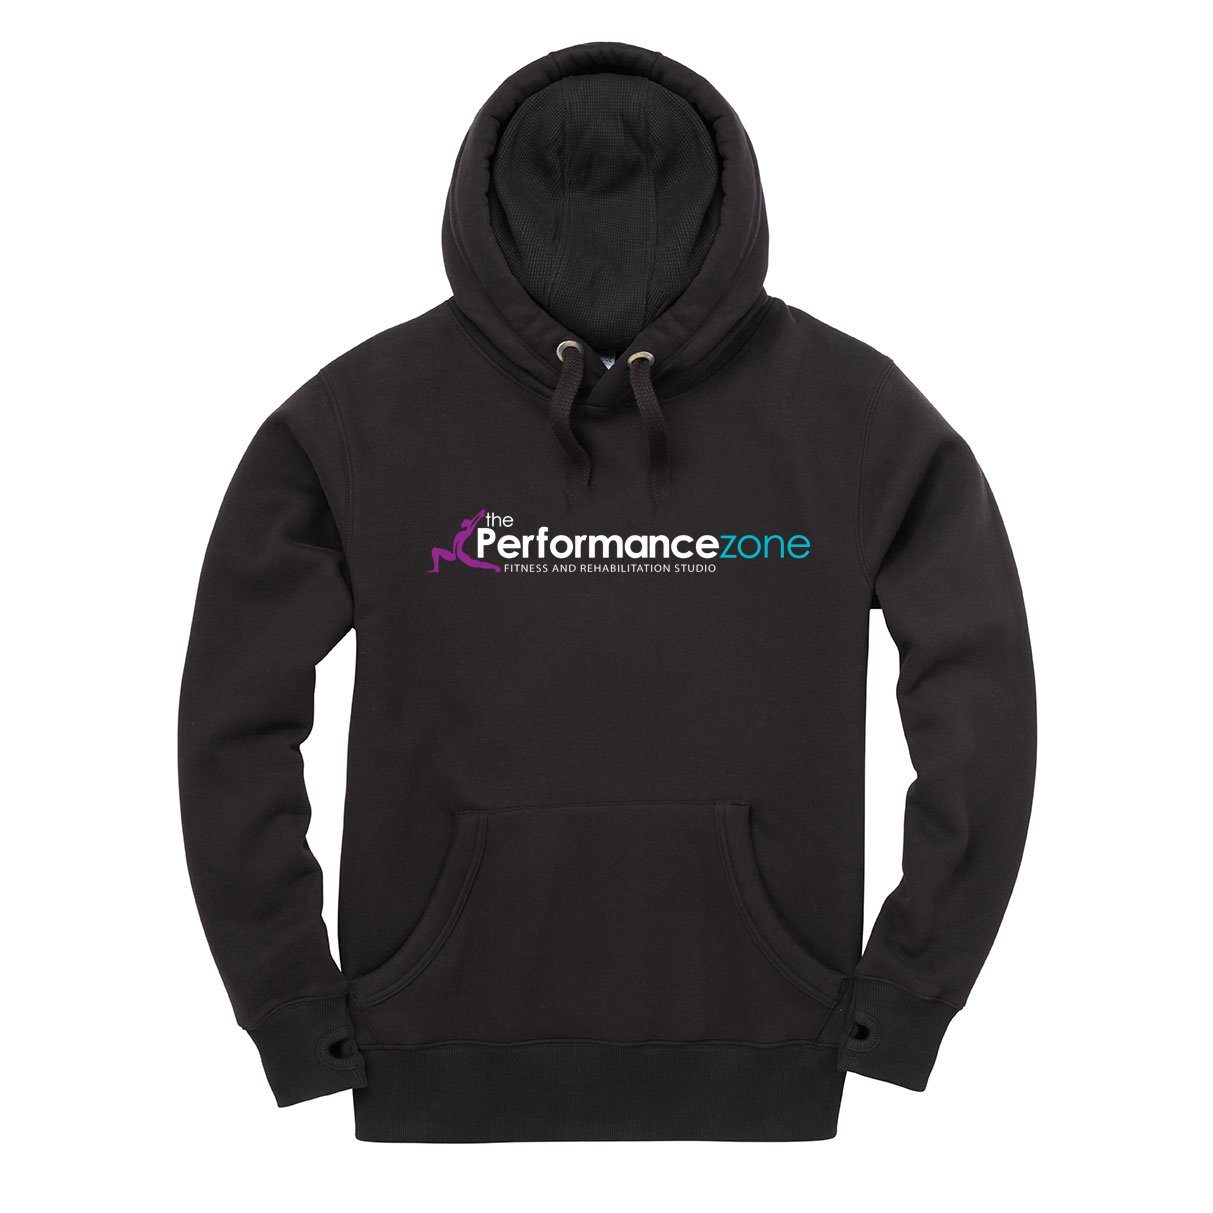 Hoodies And Jumpers - The Performance Zone Lightweight Hoodie